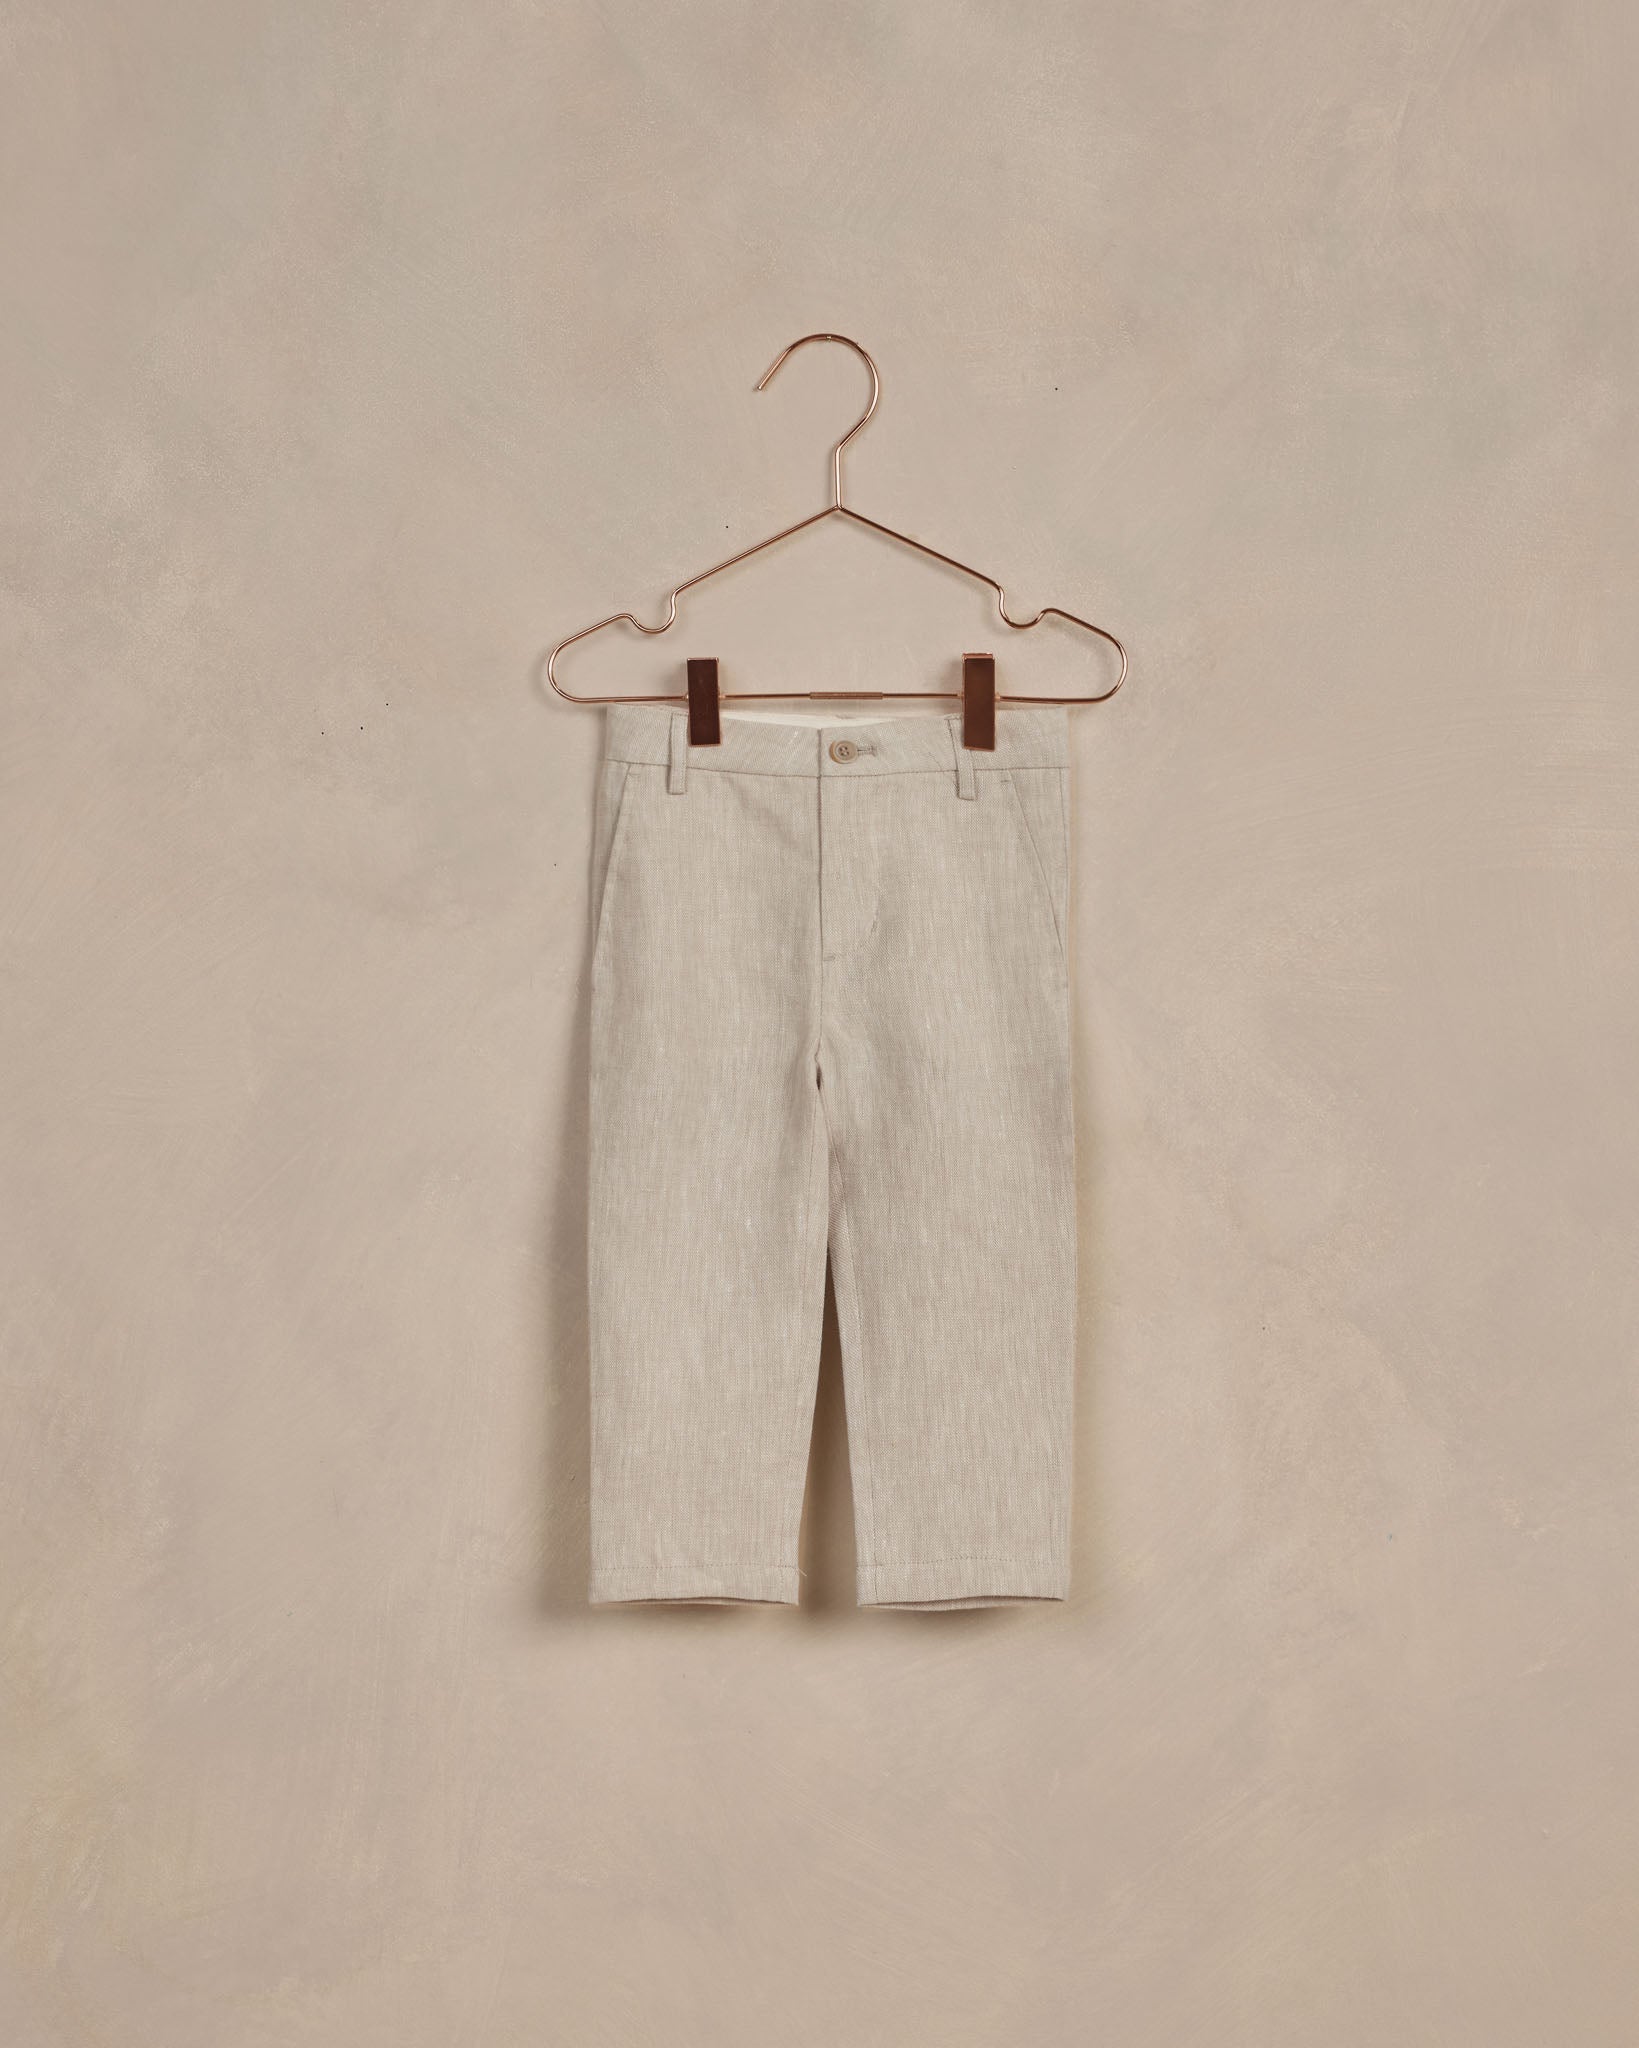 Sebastian Pant || Linen - Rylee + Cru | Kids Clothes | Trendy Baby Clothes | Modern Infant Outfits |